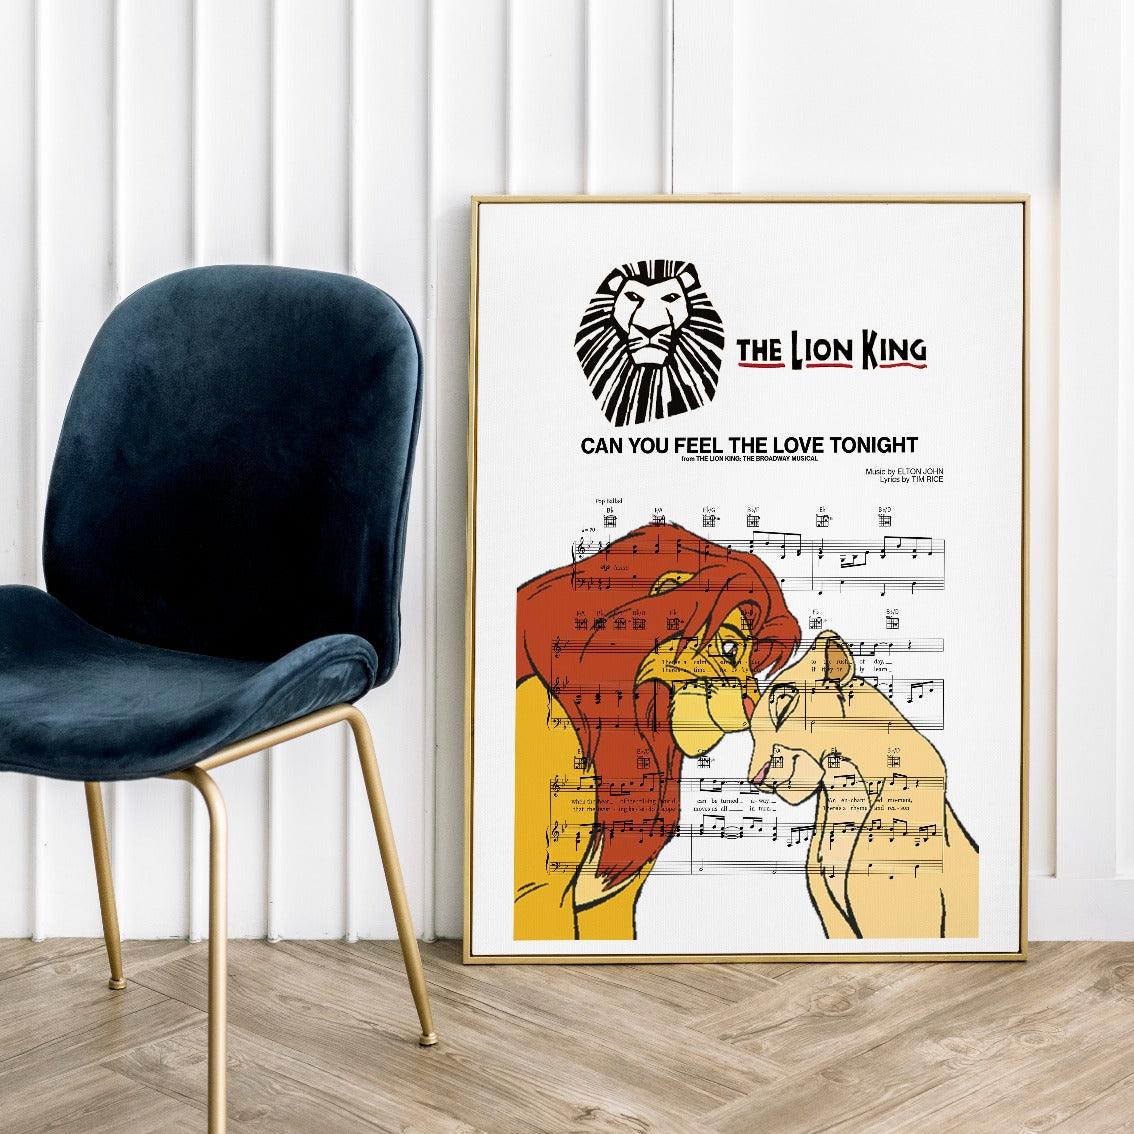 The Lion King - Can You Feel the Love Tonight print is a wall art option featuring hand-crafted music lyrics, framed art, lyrics prints, and additional gift options. With an array of choices ranging from unframed to custom-made song lyric art pieces, you can create a personalised touch to your home or give a unique wedding or first dance lyrics gift.